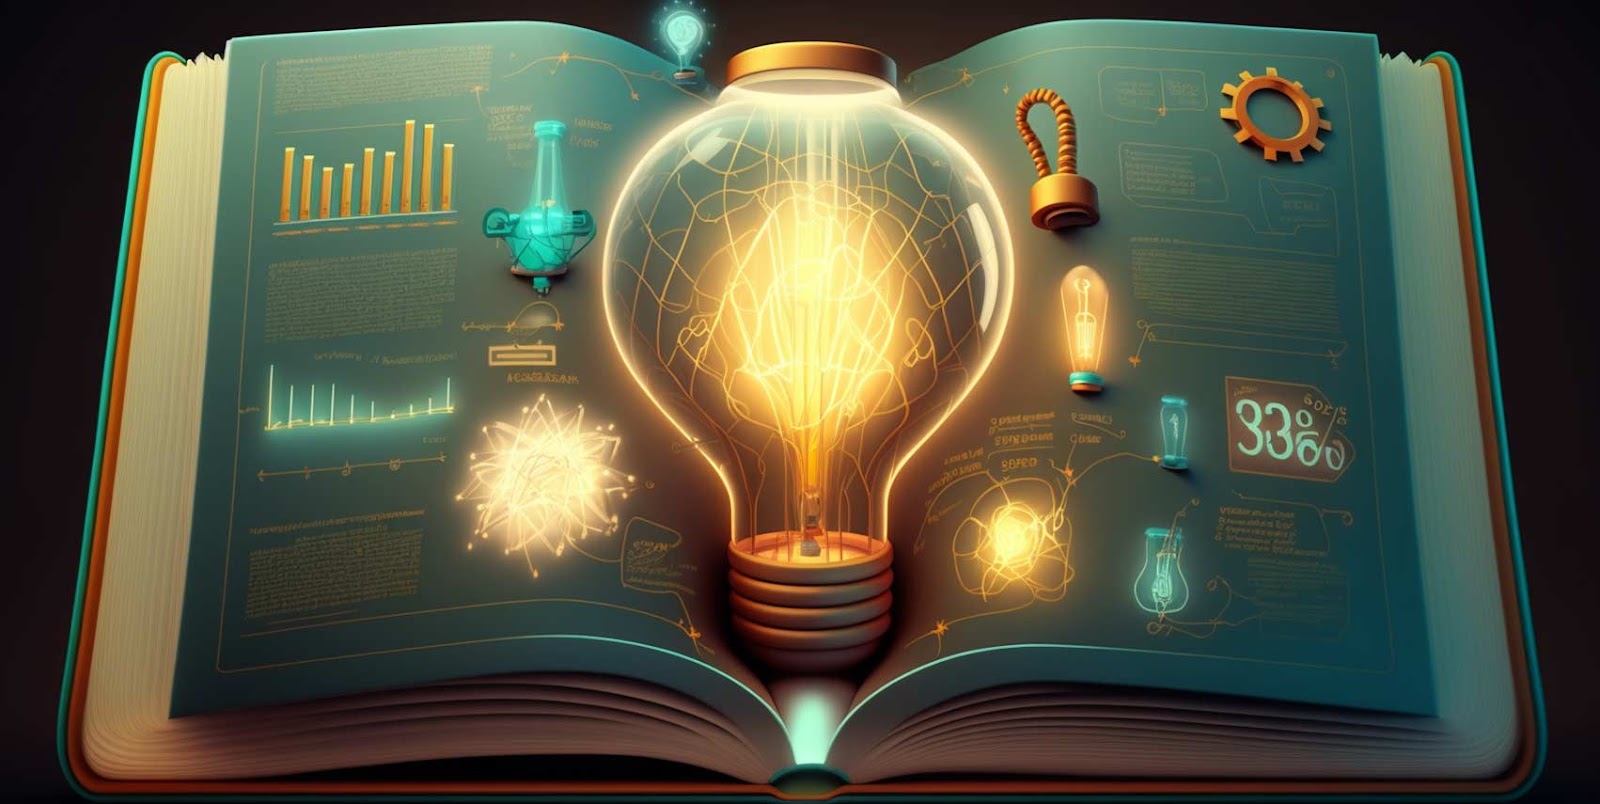 3D concept art: an open book with a lamp, graphical elements, icons, gears, and details